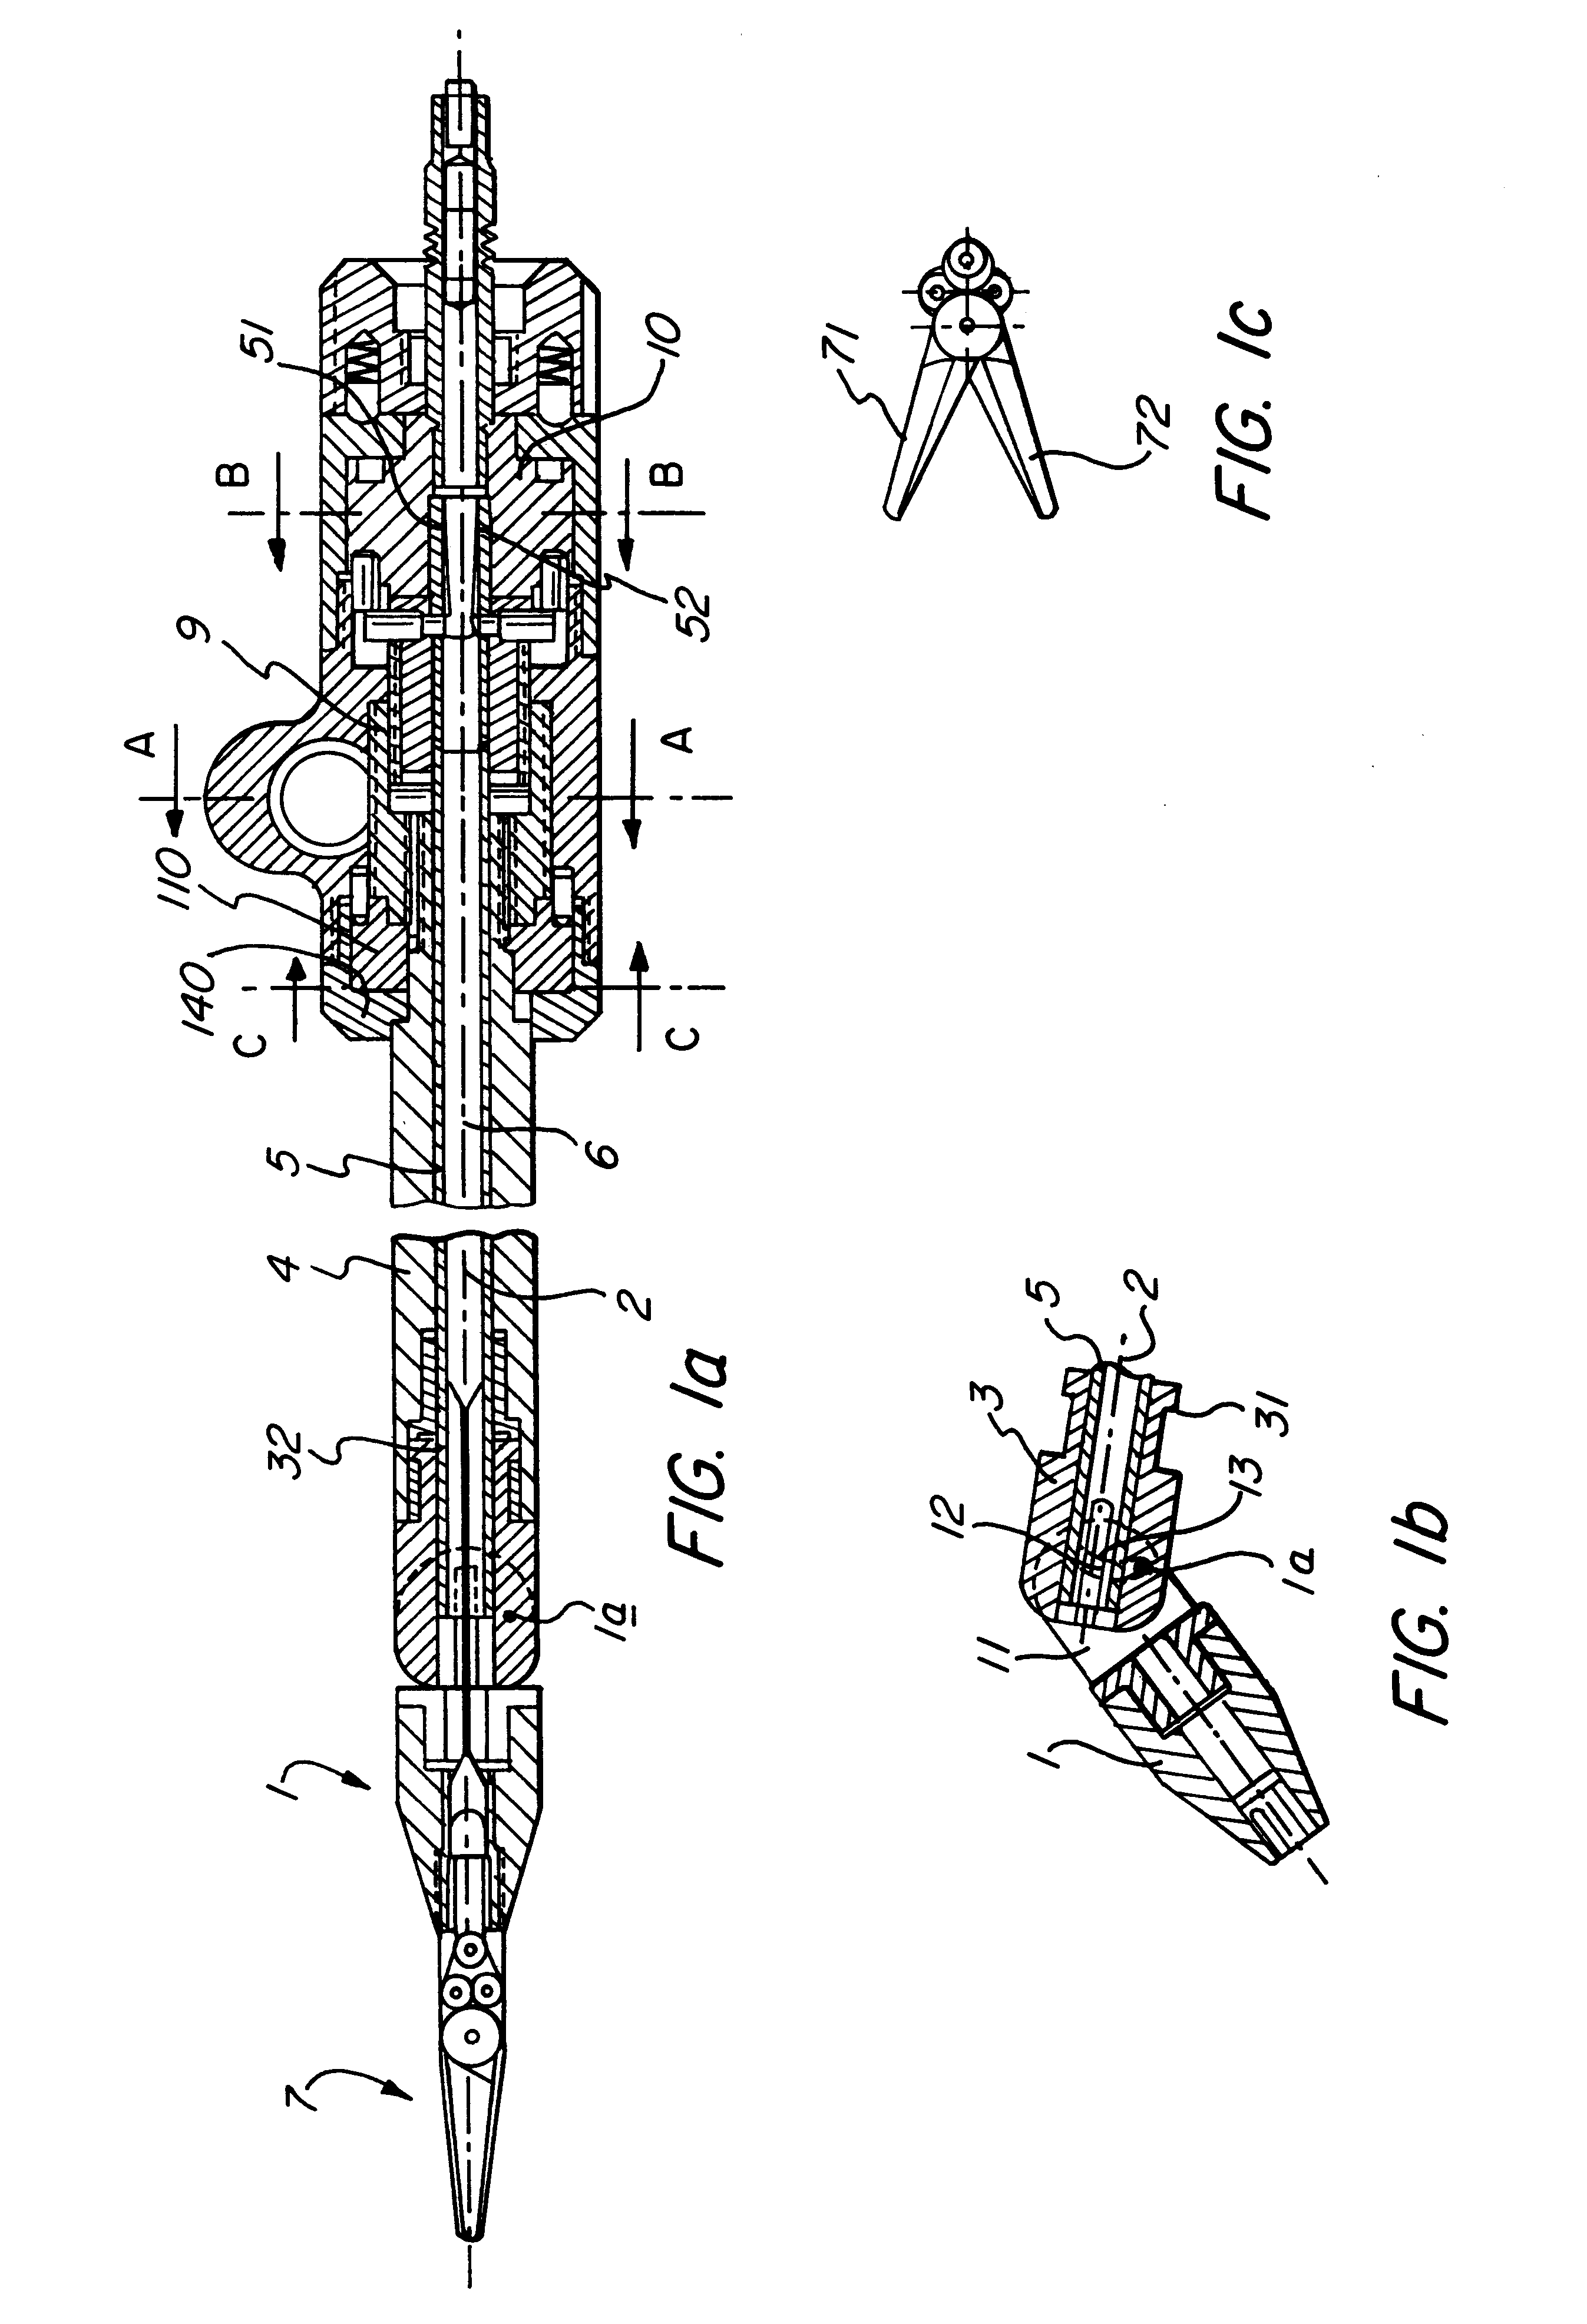 Endoscopic instrument which can be bent